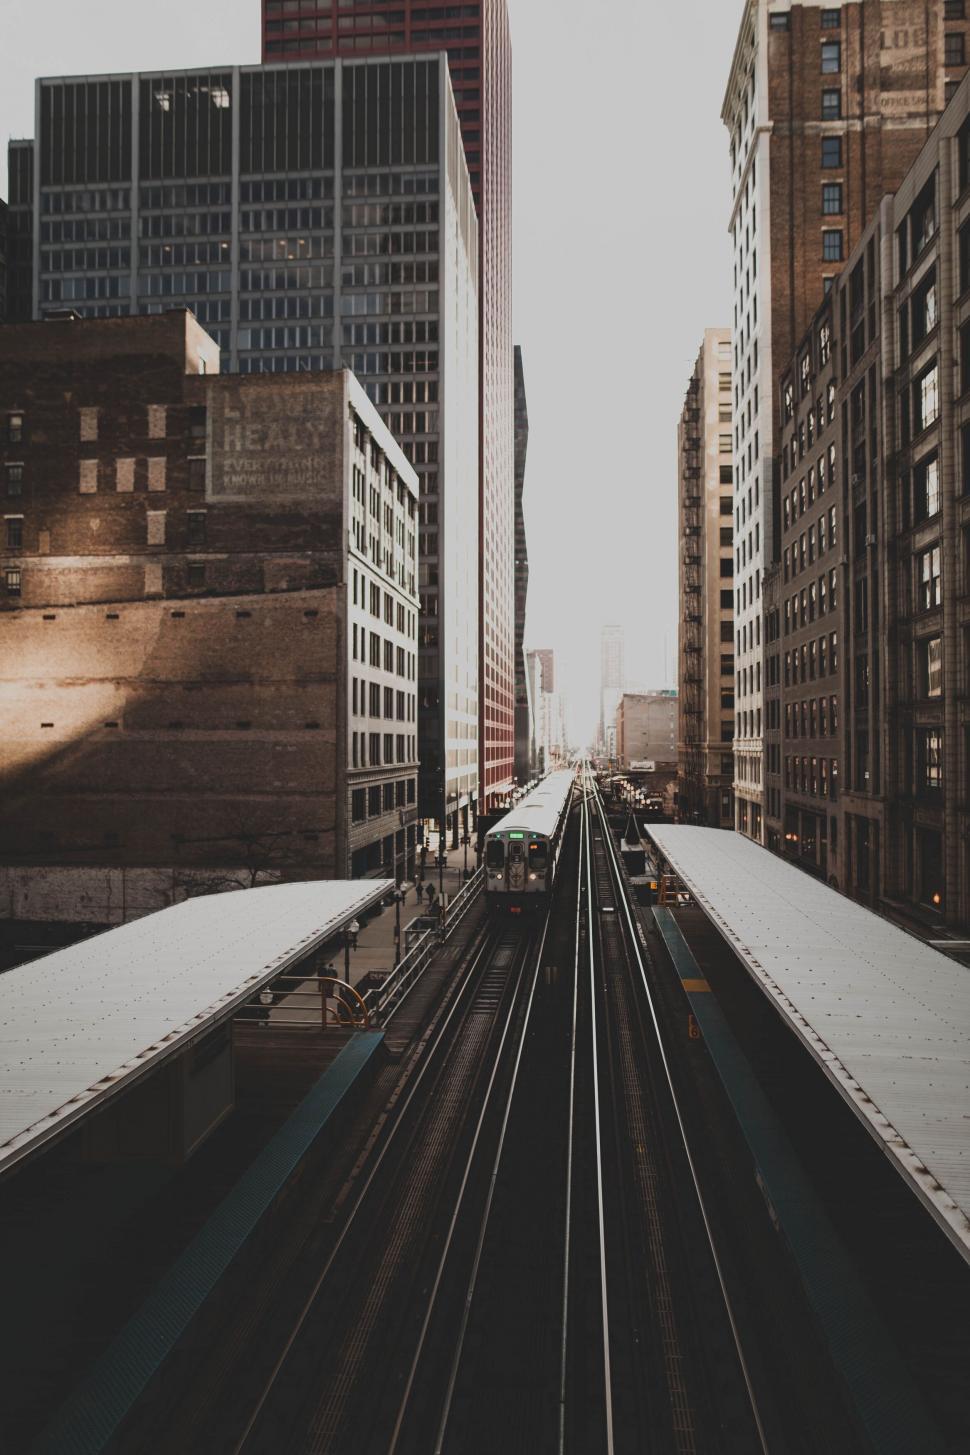 Free Image of A train going down a train track in a city 